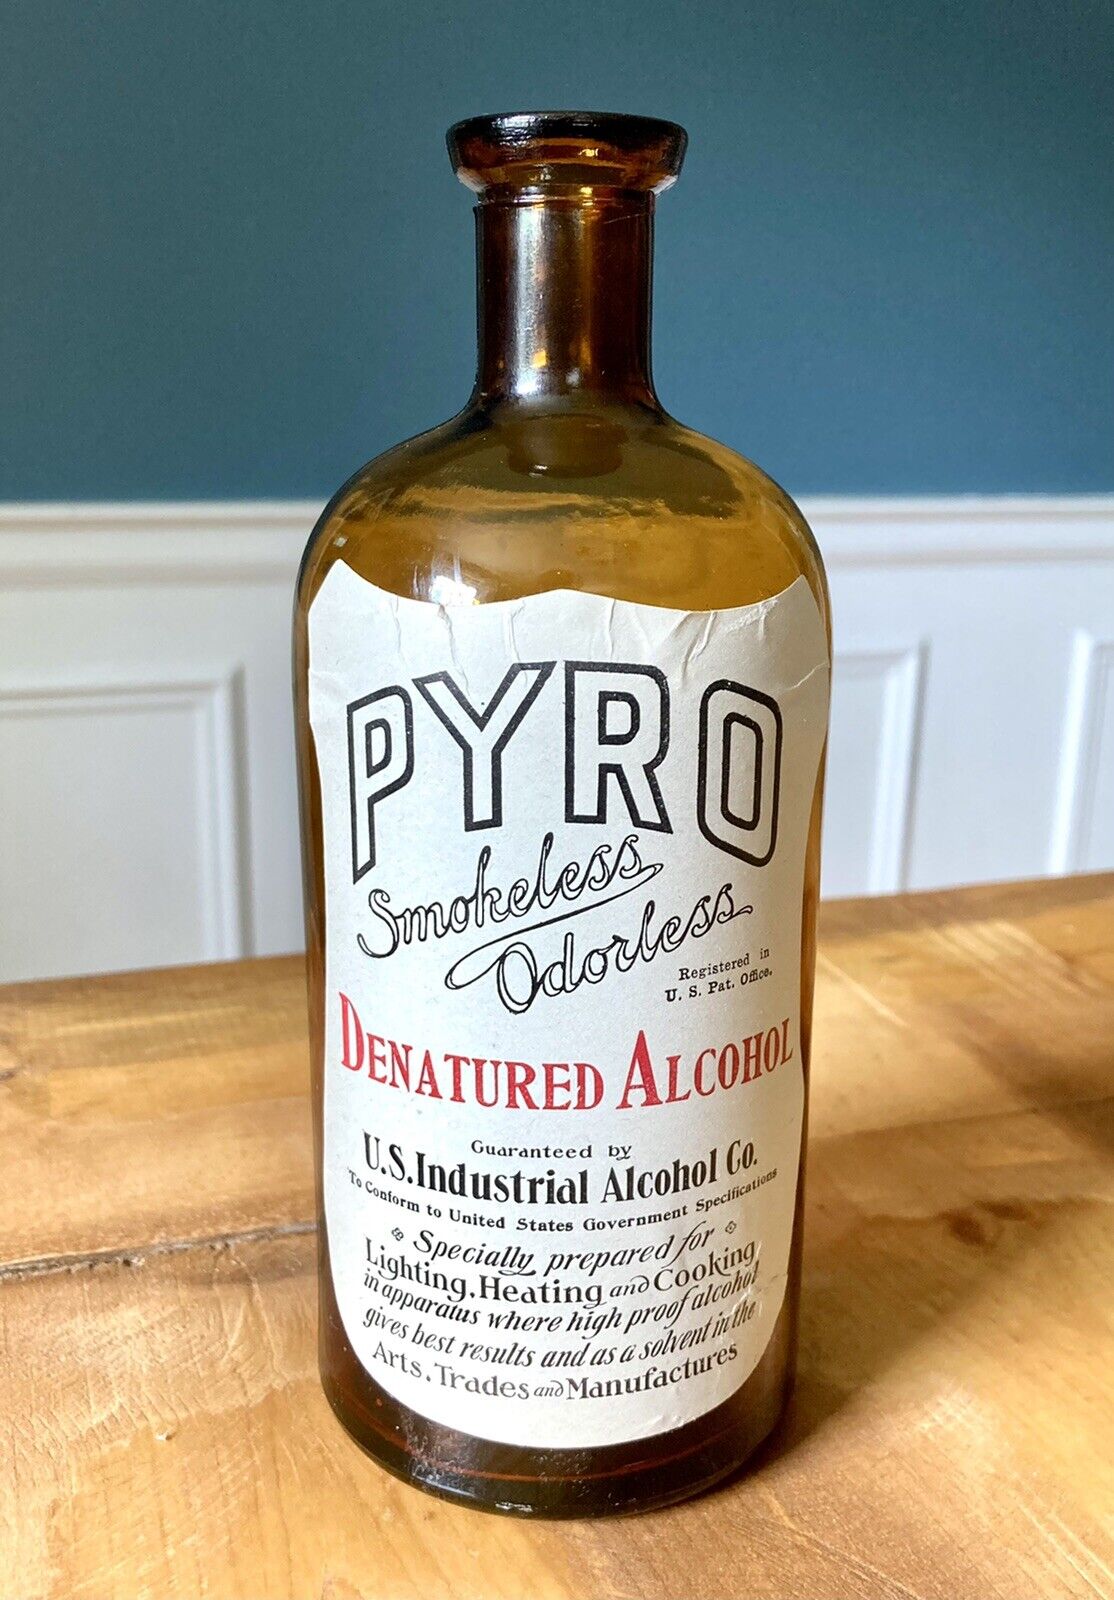 PYRO DENATURED ALCOHOL AMBER BOTTLE, US INDUSTRIAL ALCOHOL CO., RARE